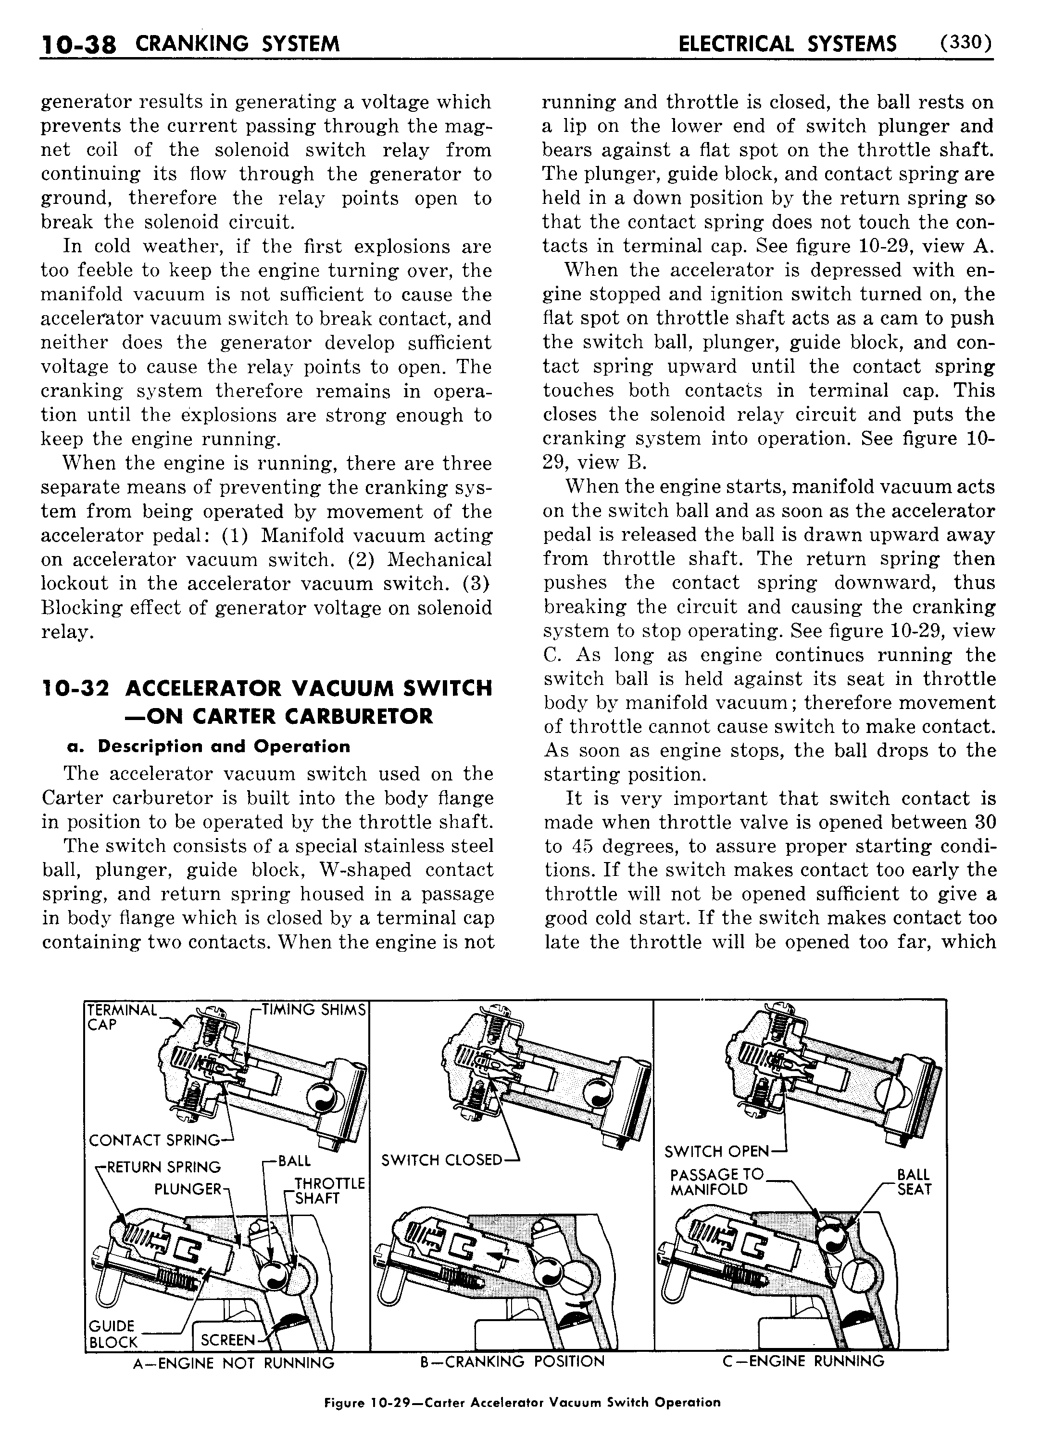 n_11 1951 Buick Shop Manual - Electrical Systems-038-038.jpg